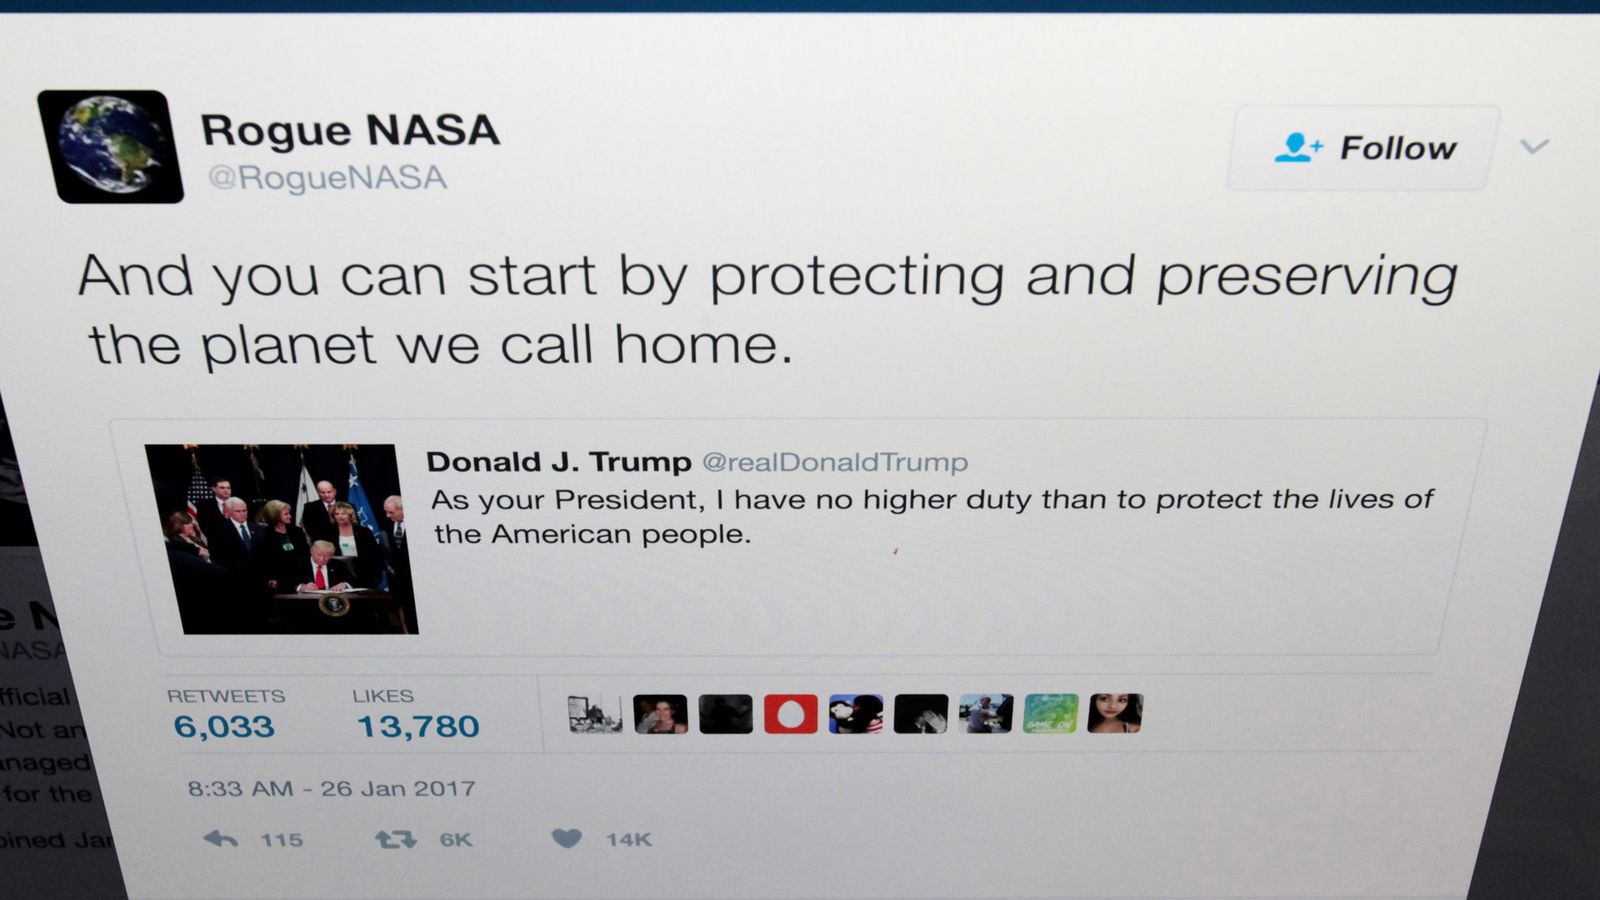 Foto: The twitter account of rogue nasa is seen replying to a tweet by u.s. president donald trump in a photo illustration